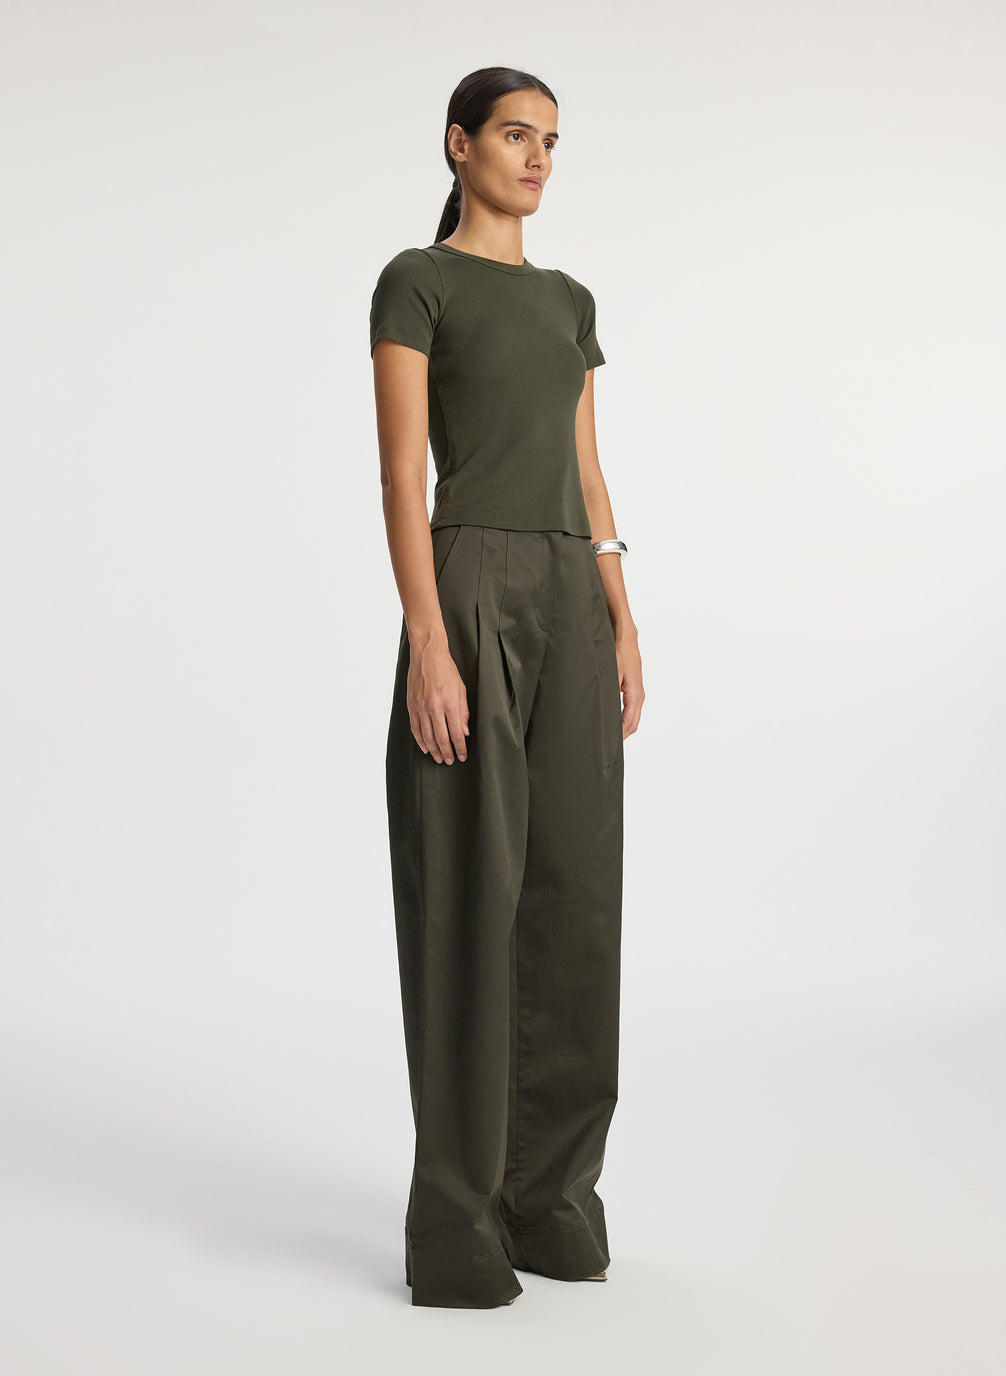 side  view of woman wearing olive green tshirt and olive green wide leg pants